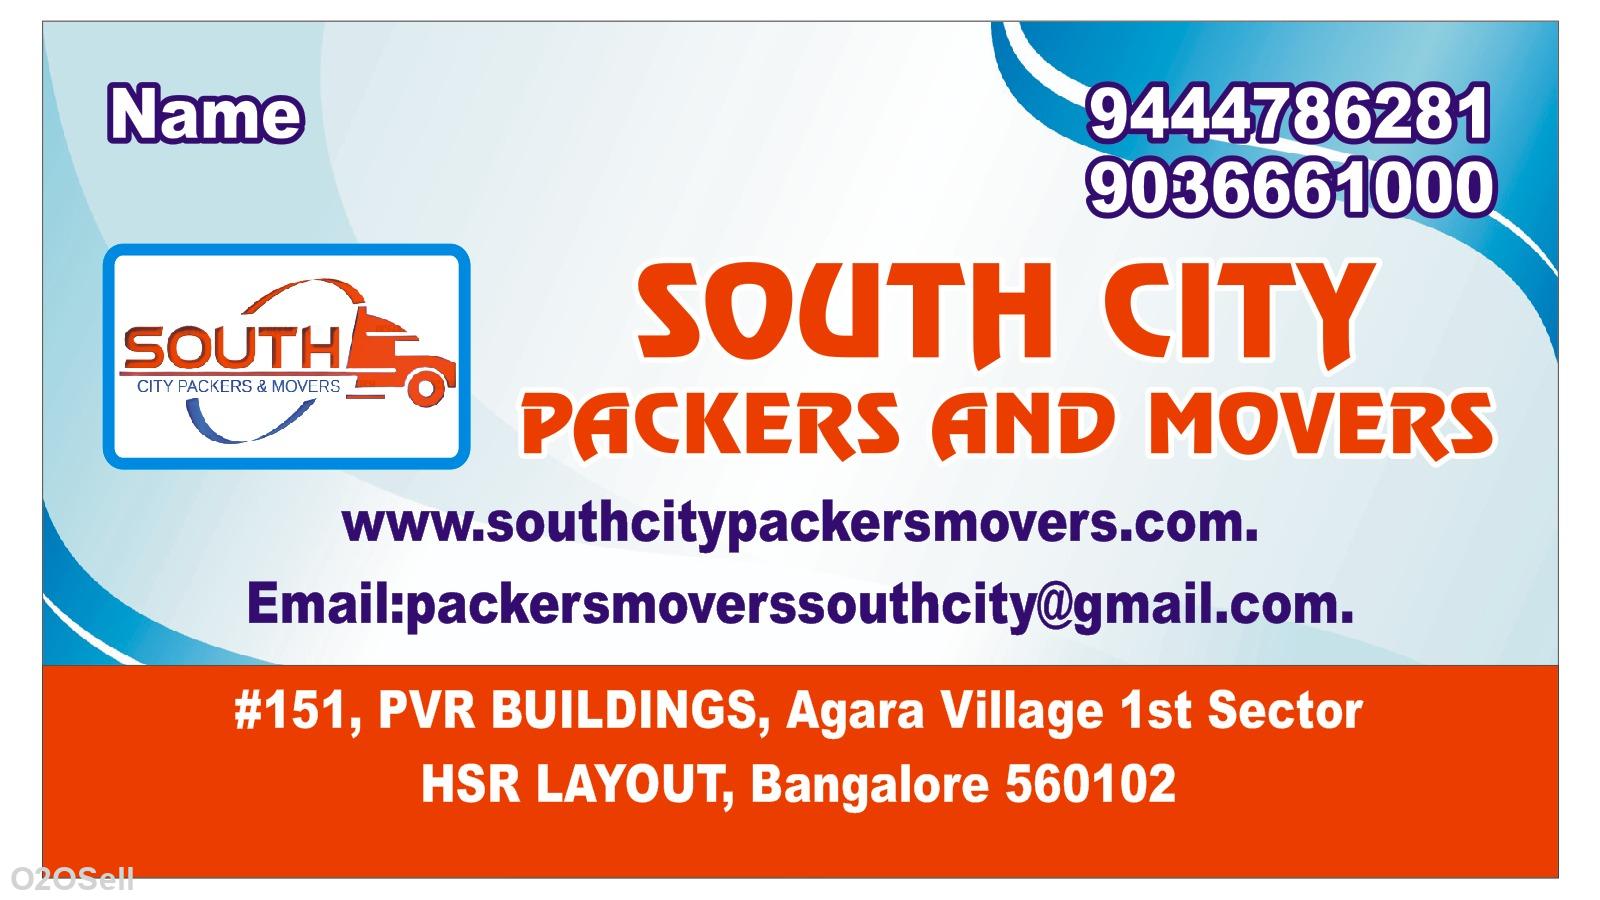 SouthCity Packers And Movers HSR Bangalore  - Profile Image